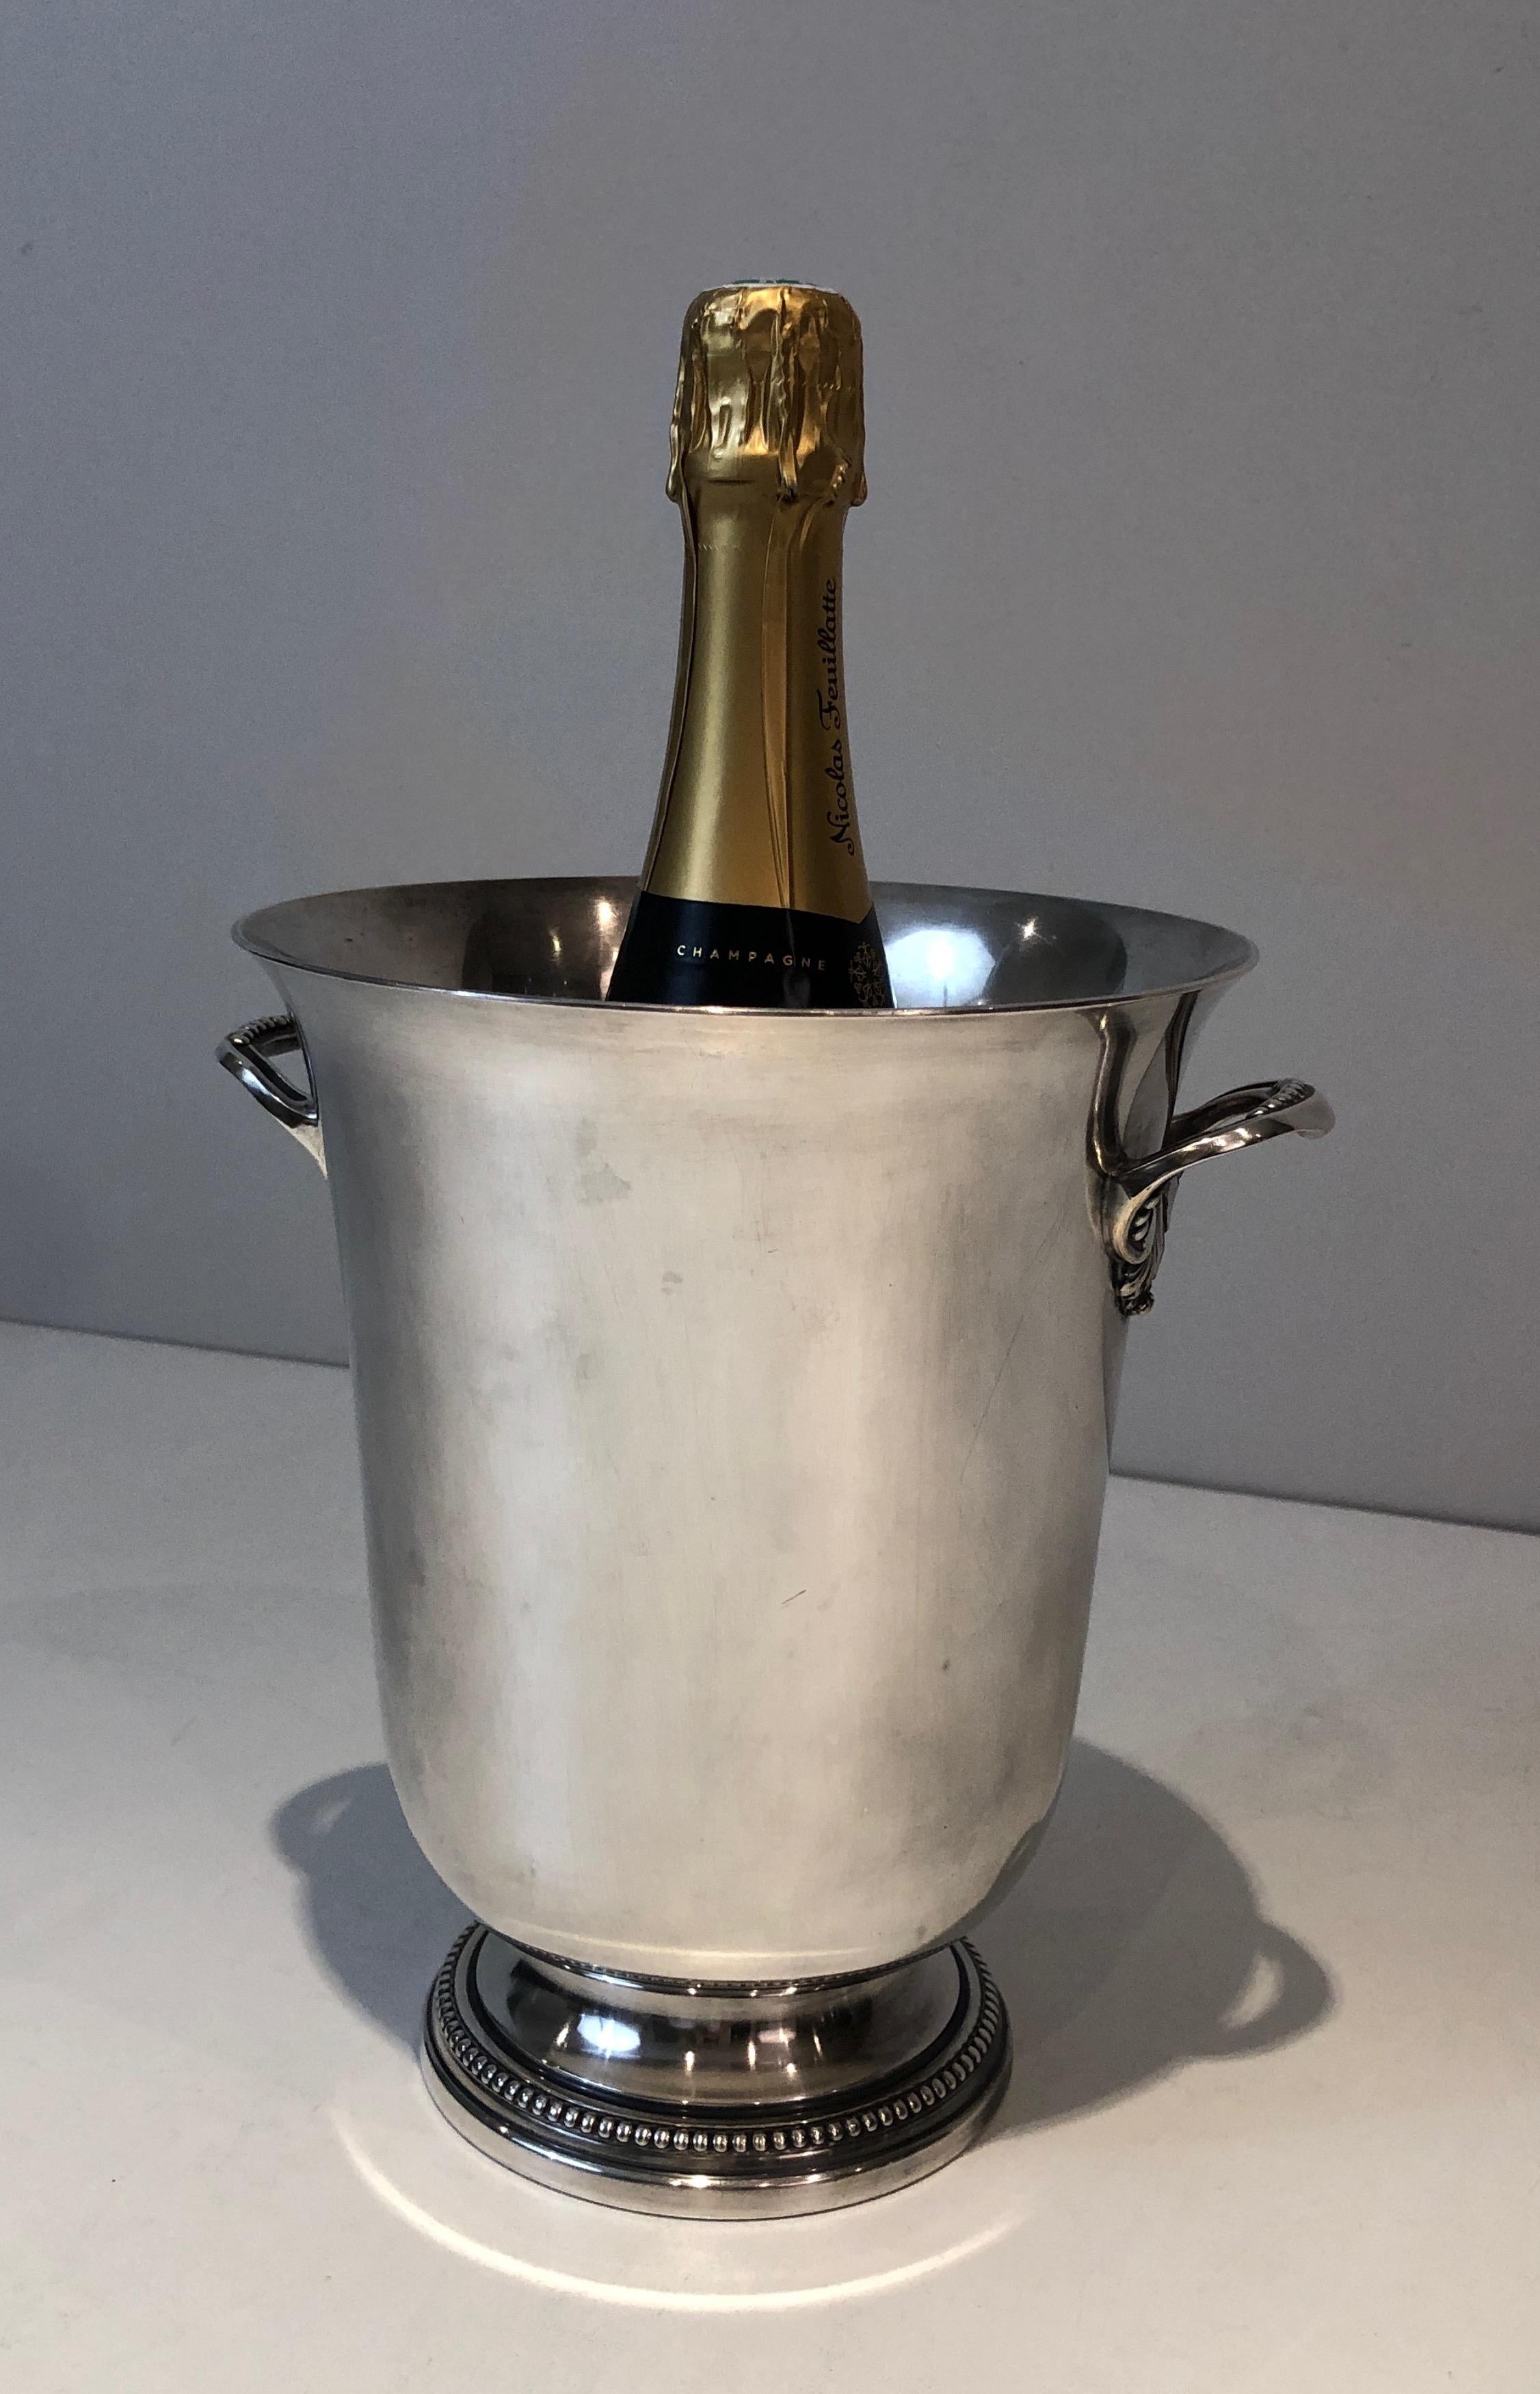 This very elegant champagne bucket is made of silver plated. This is a French work, circa 1930.